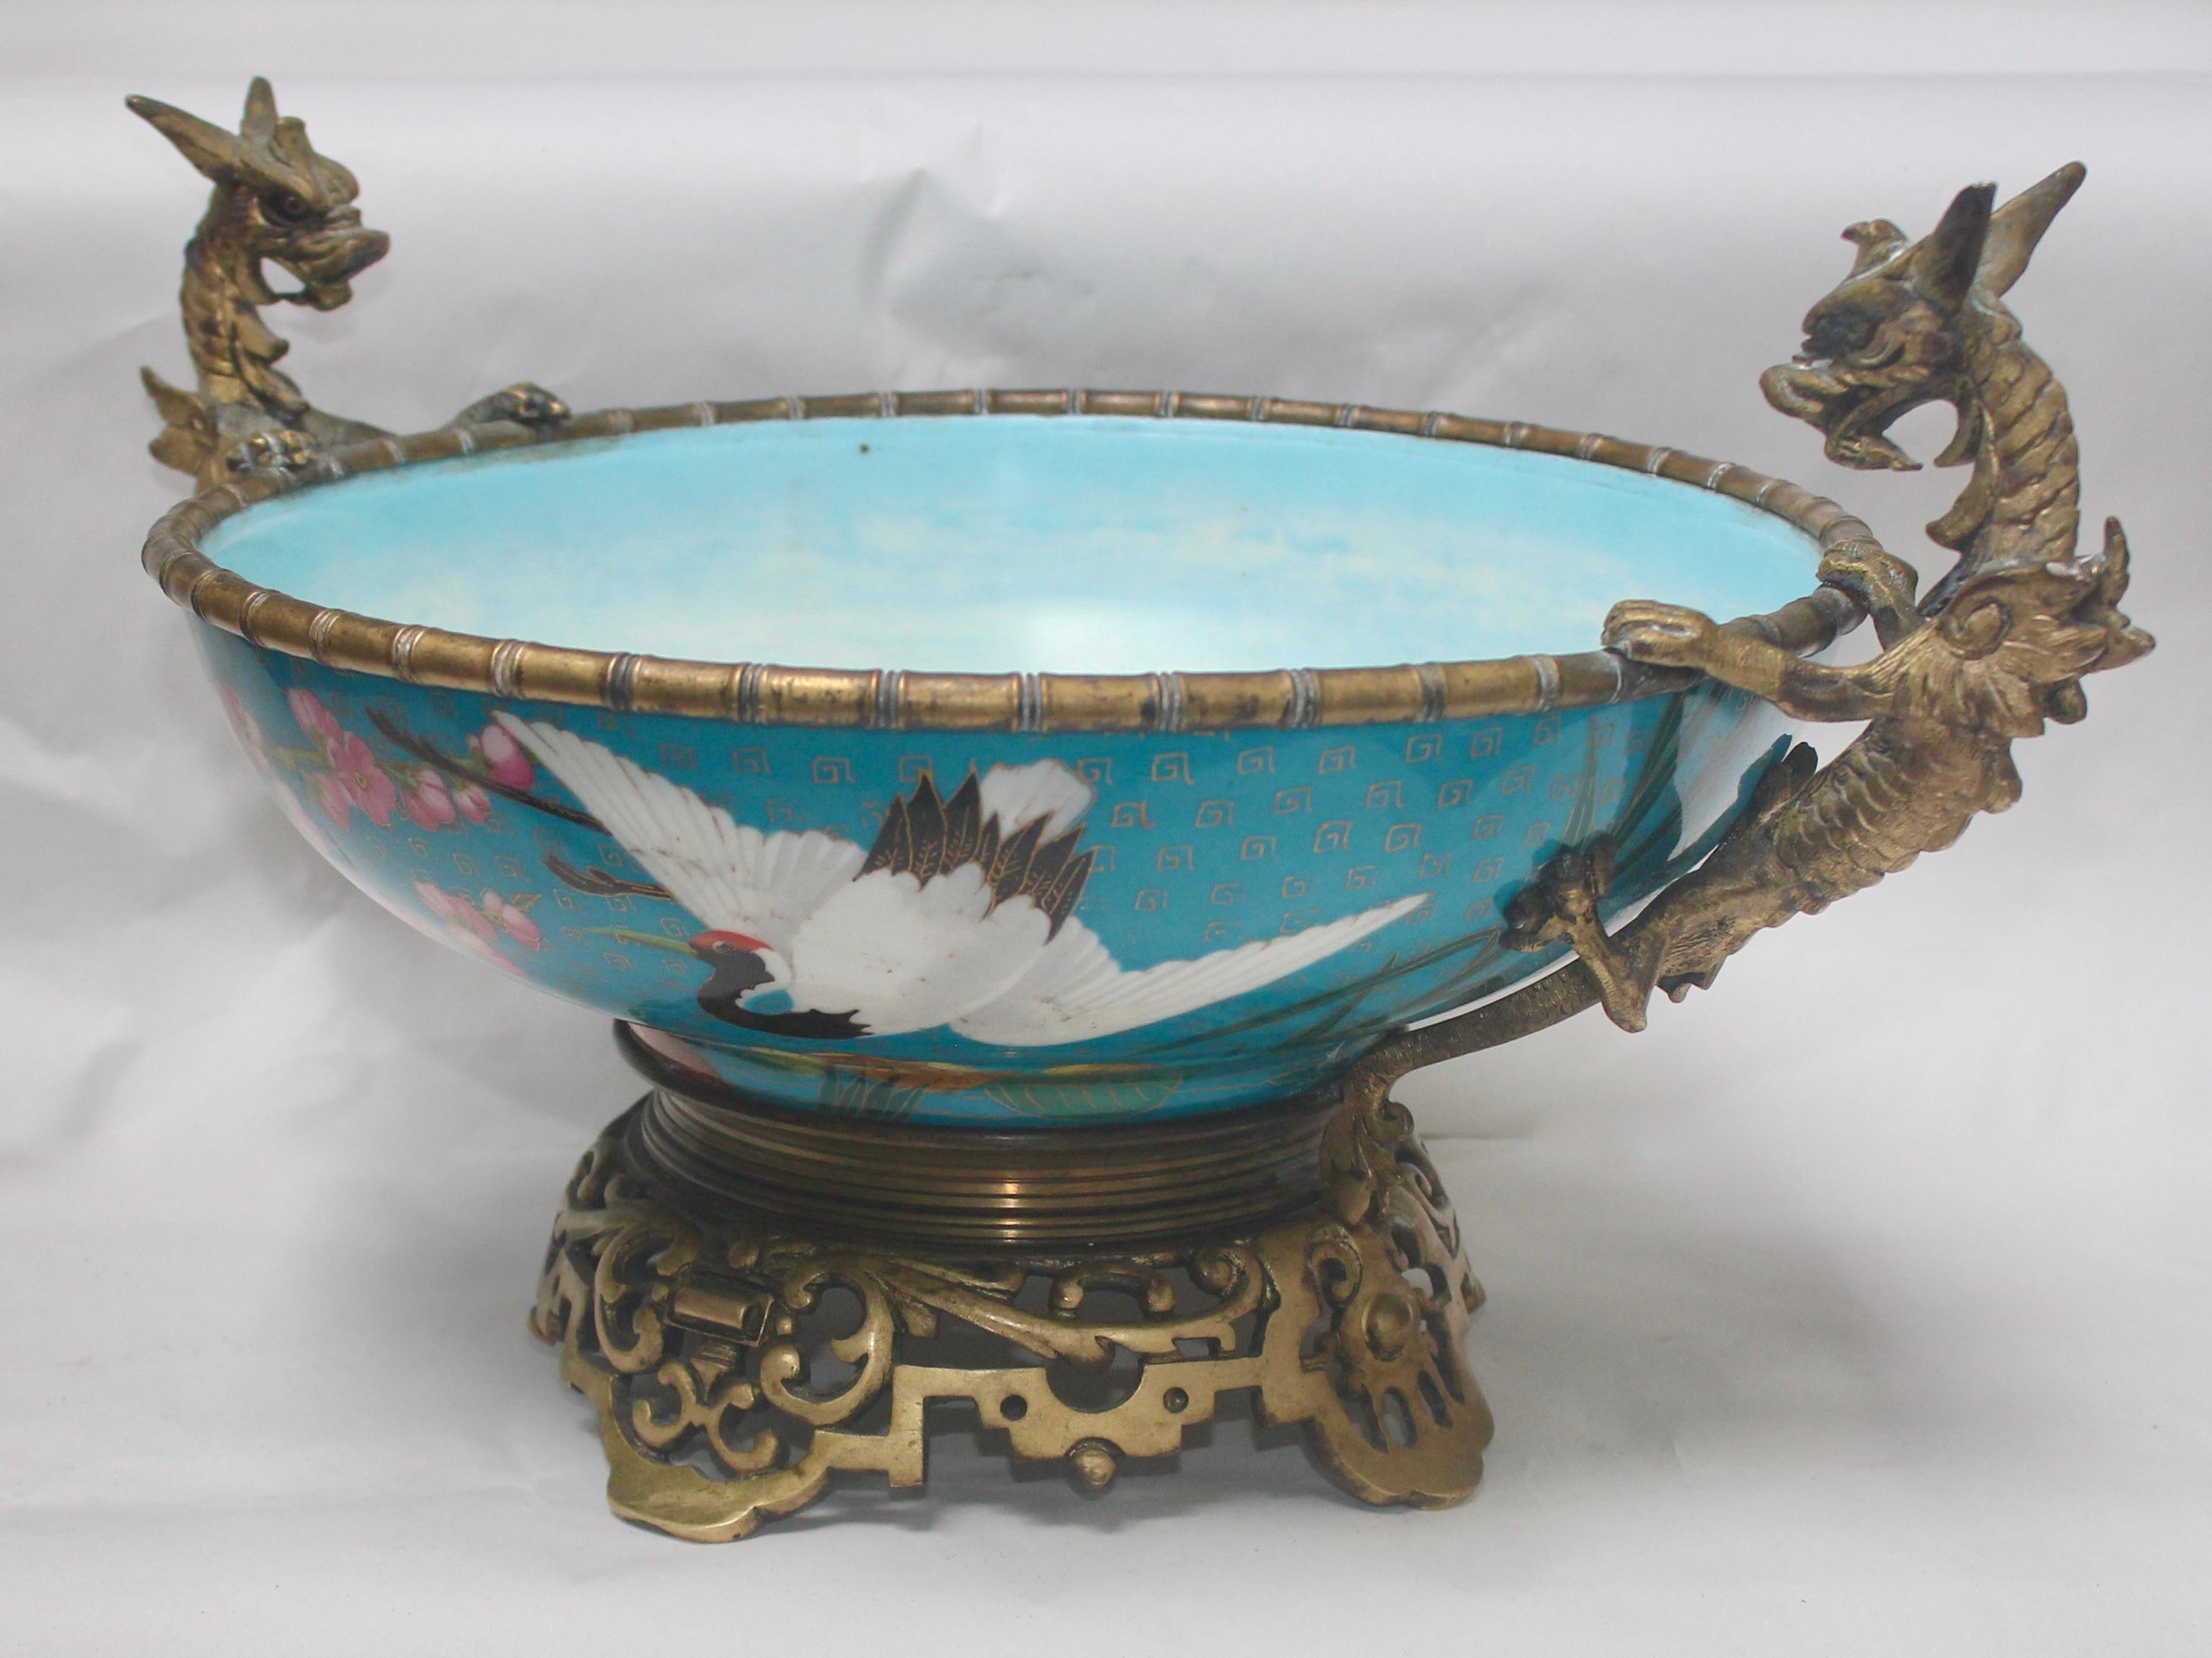 Gilt French 19th Century Ormolu-Mounted and Porcelain Centerpiece and Vide-Poches